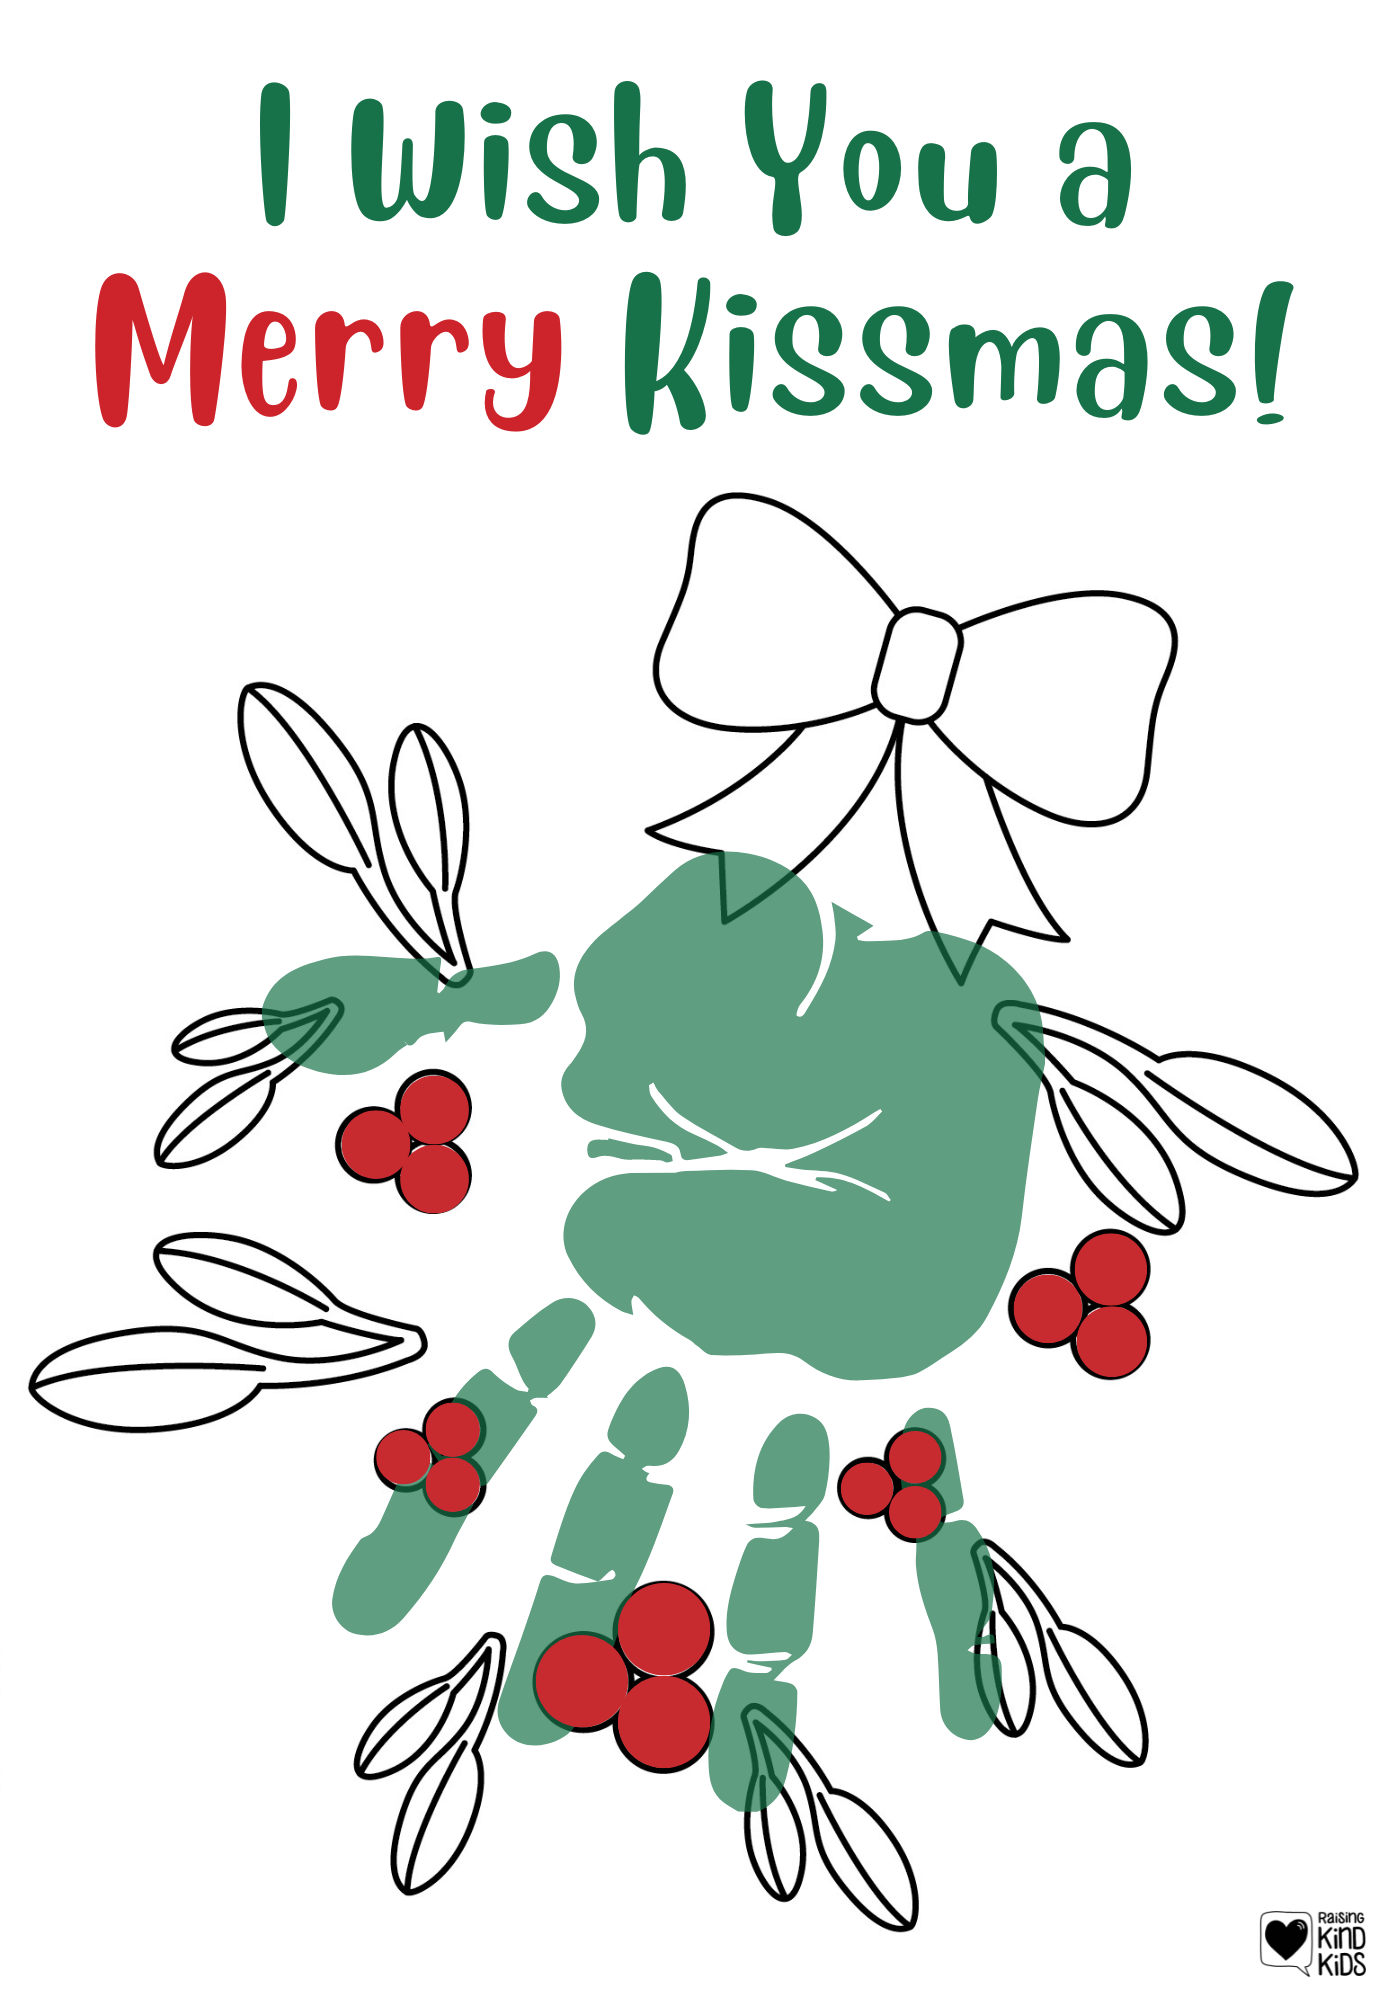 Use these Christmas handprint kindness Crafts as a way to celebrate Christmas and spread some kindness in your community. 